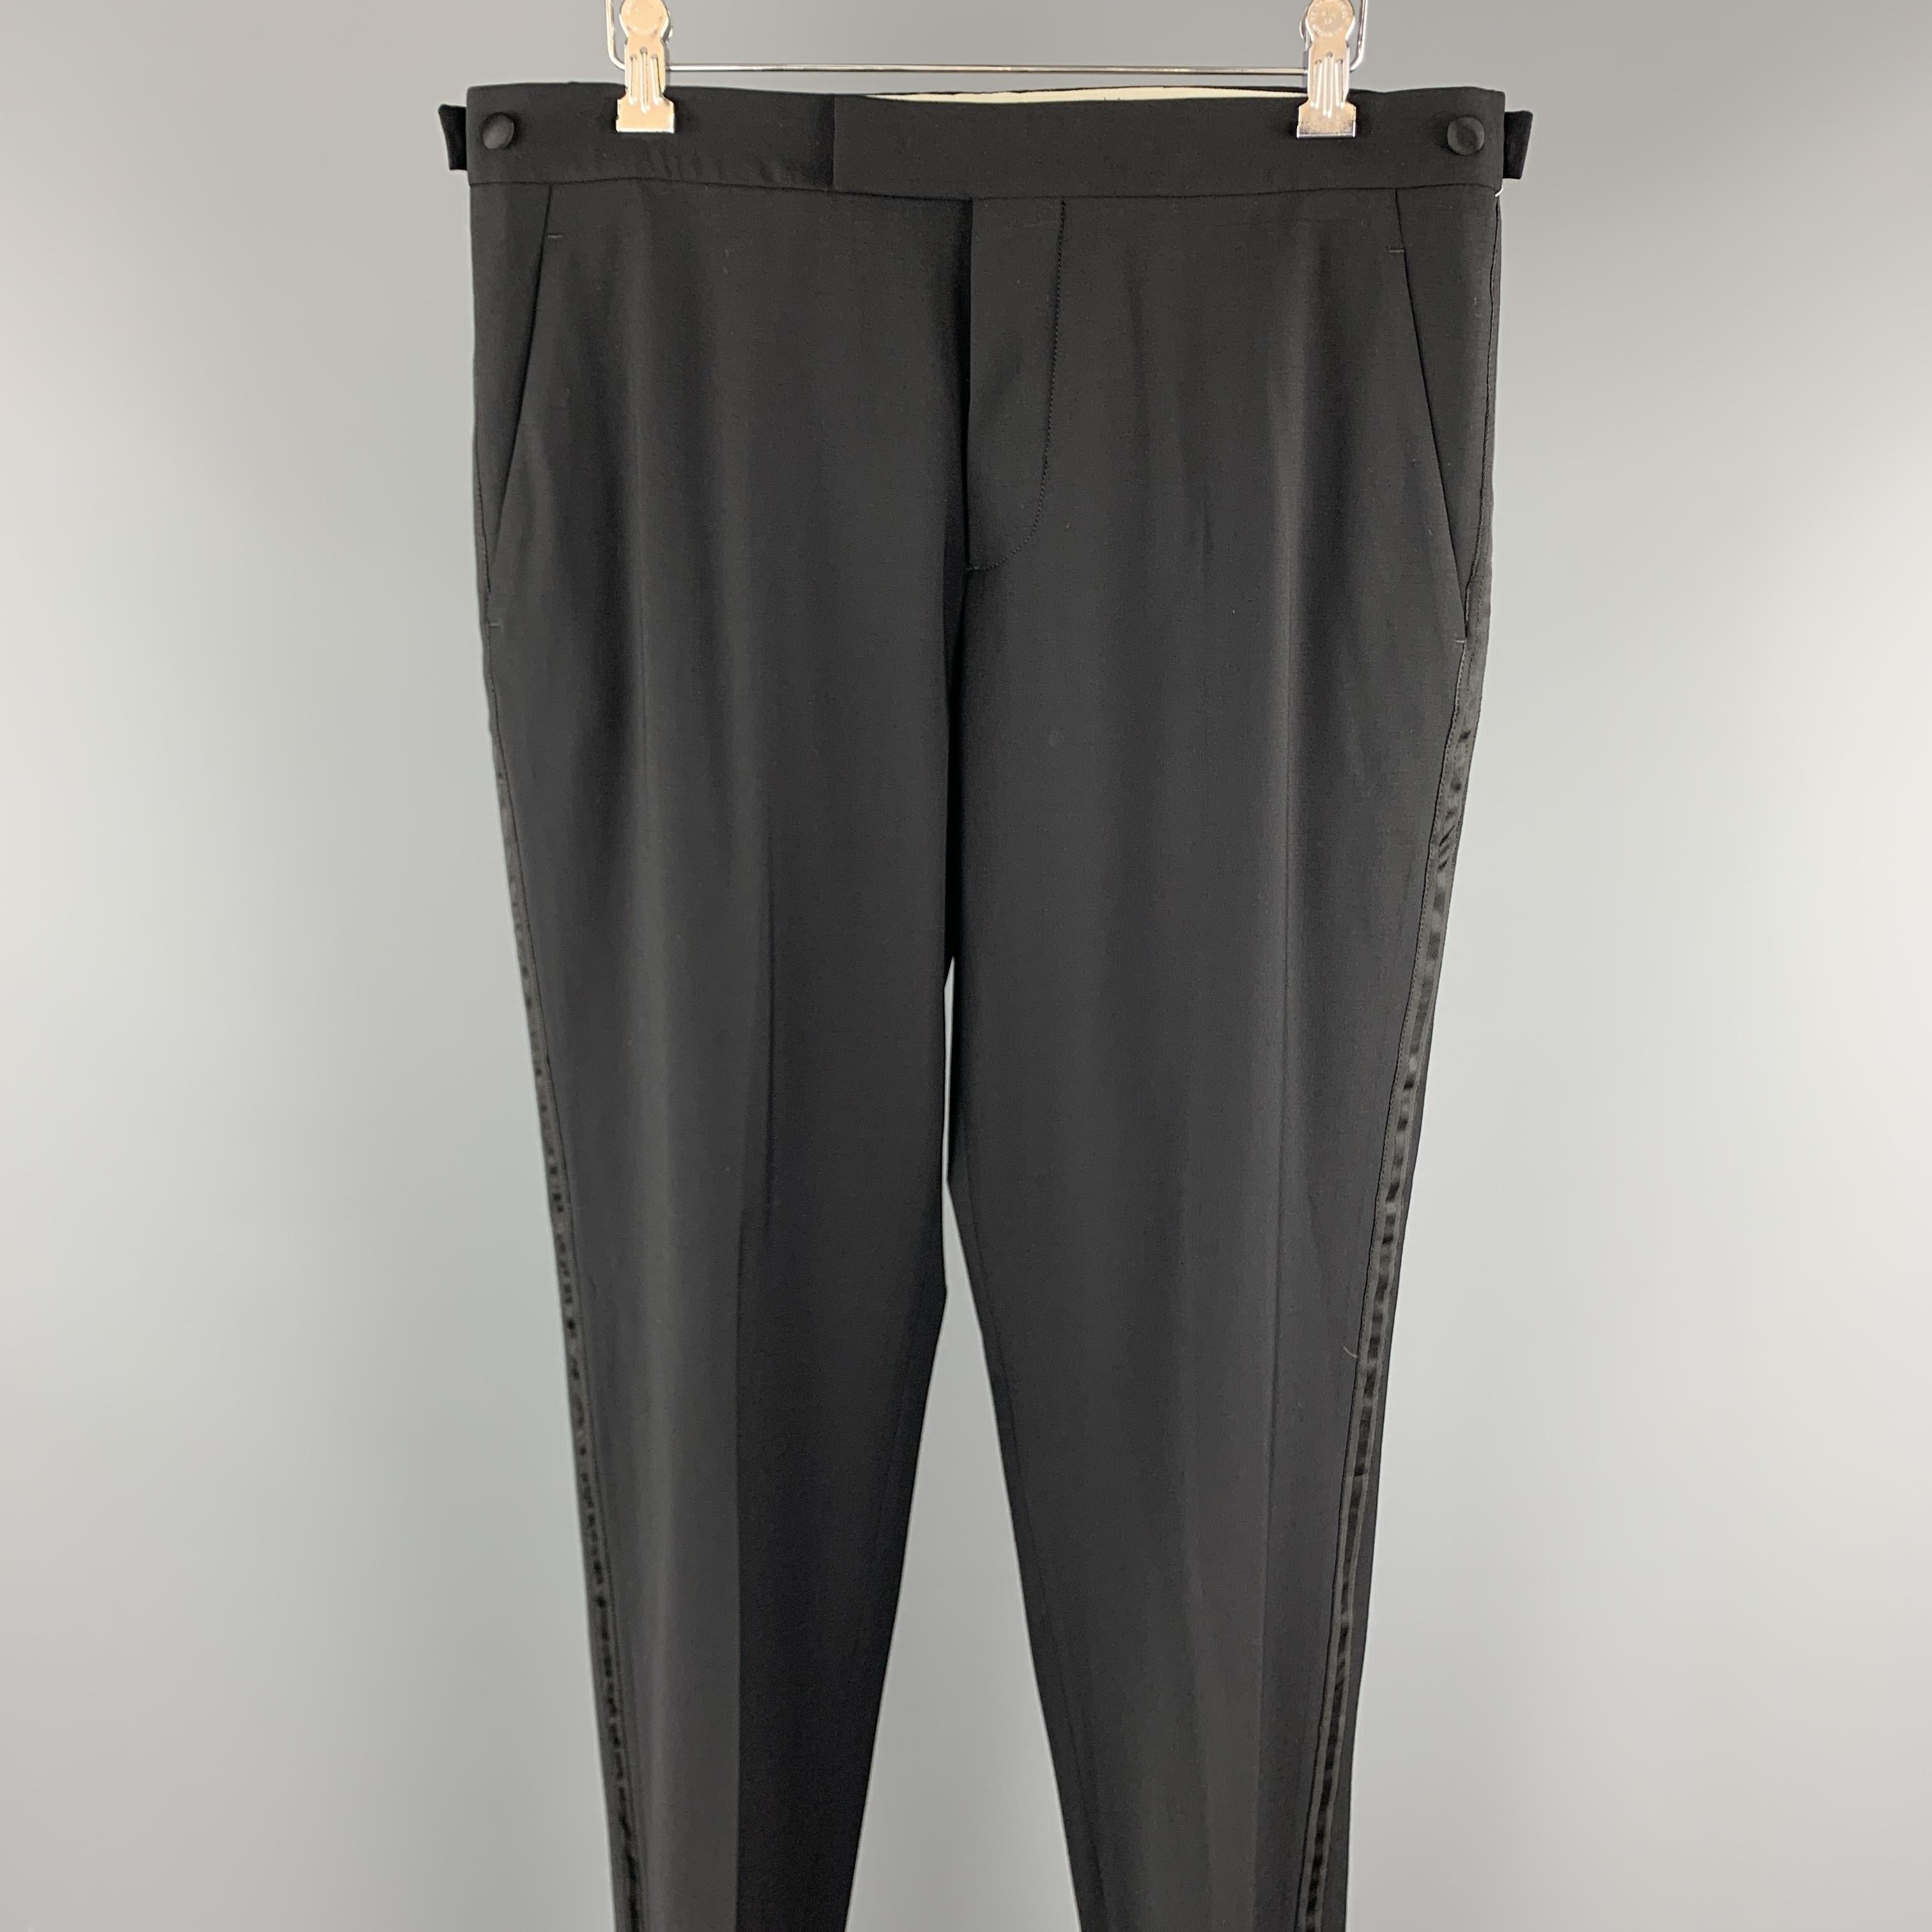 VINTAGE HELMUT LANG dress pants comes in a black wool featuring a tuxedo style, front tab, and a button fly closure. Made in Italy.

Excellent Pre-Owned Condition.
Marked: 48

Measurements:

Waist: 32 in. 
Rise: 9.5 in. 
Inseam: 32.5 in. 